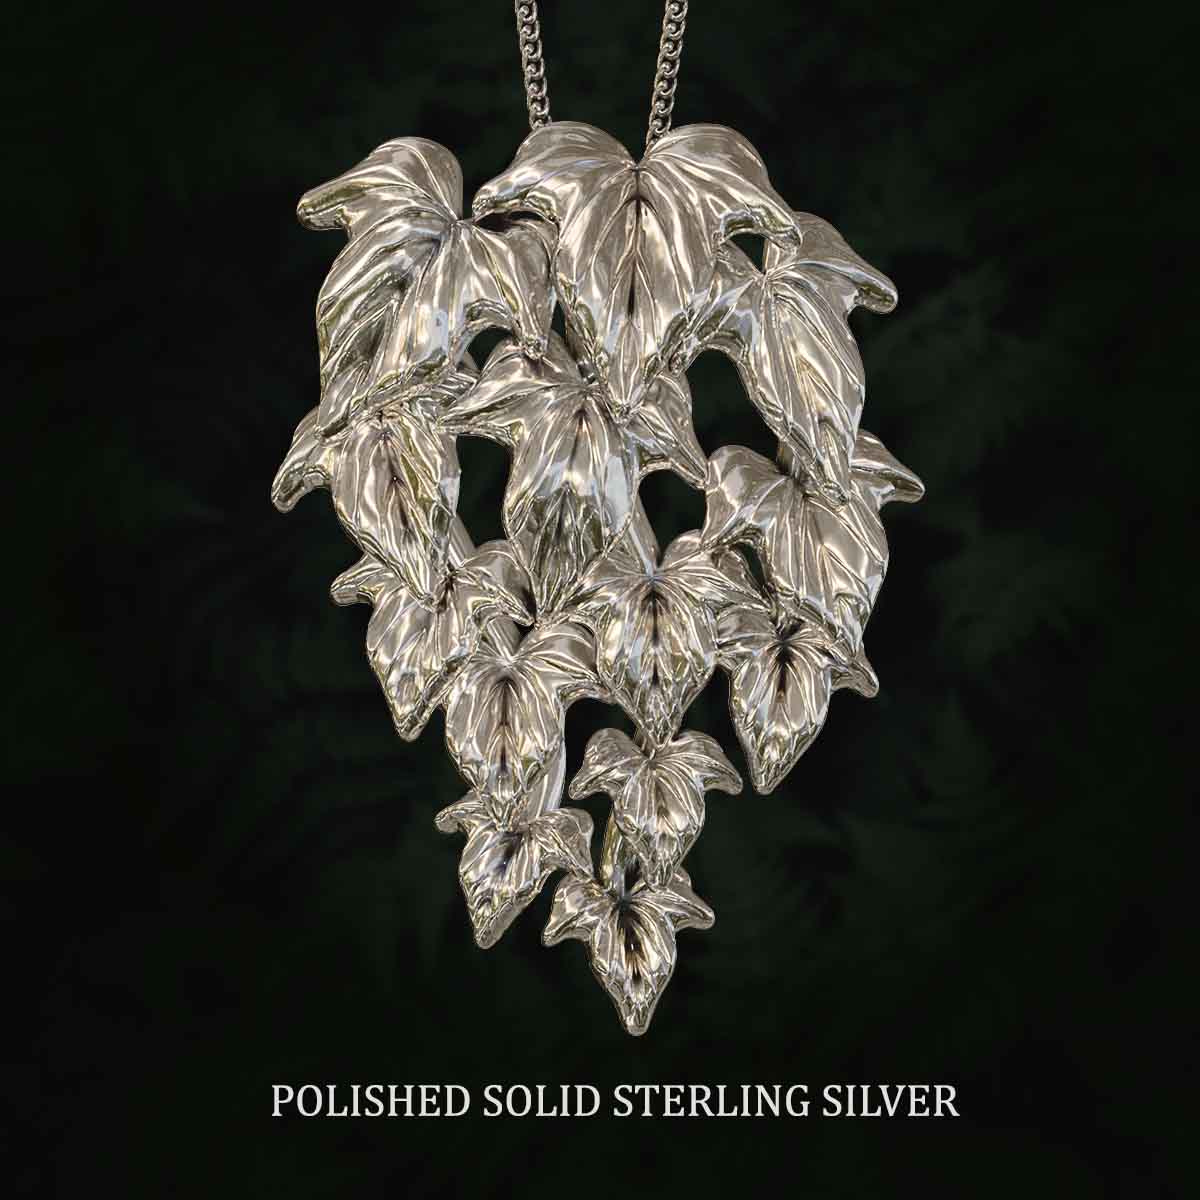     Polished-Solid-Sterling-Silver-Flowing-Vine-Medium-Pendant-Jewelry-For-Necklace